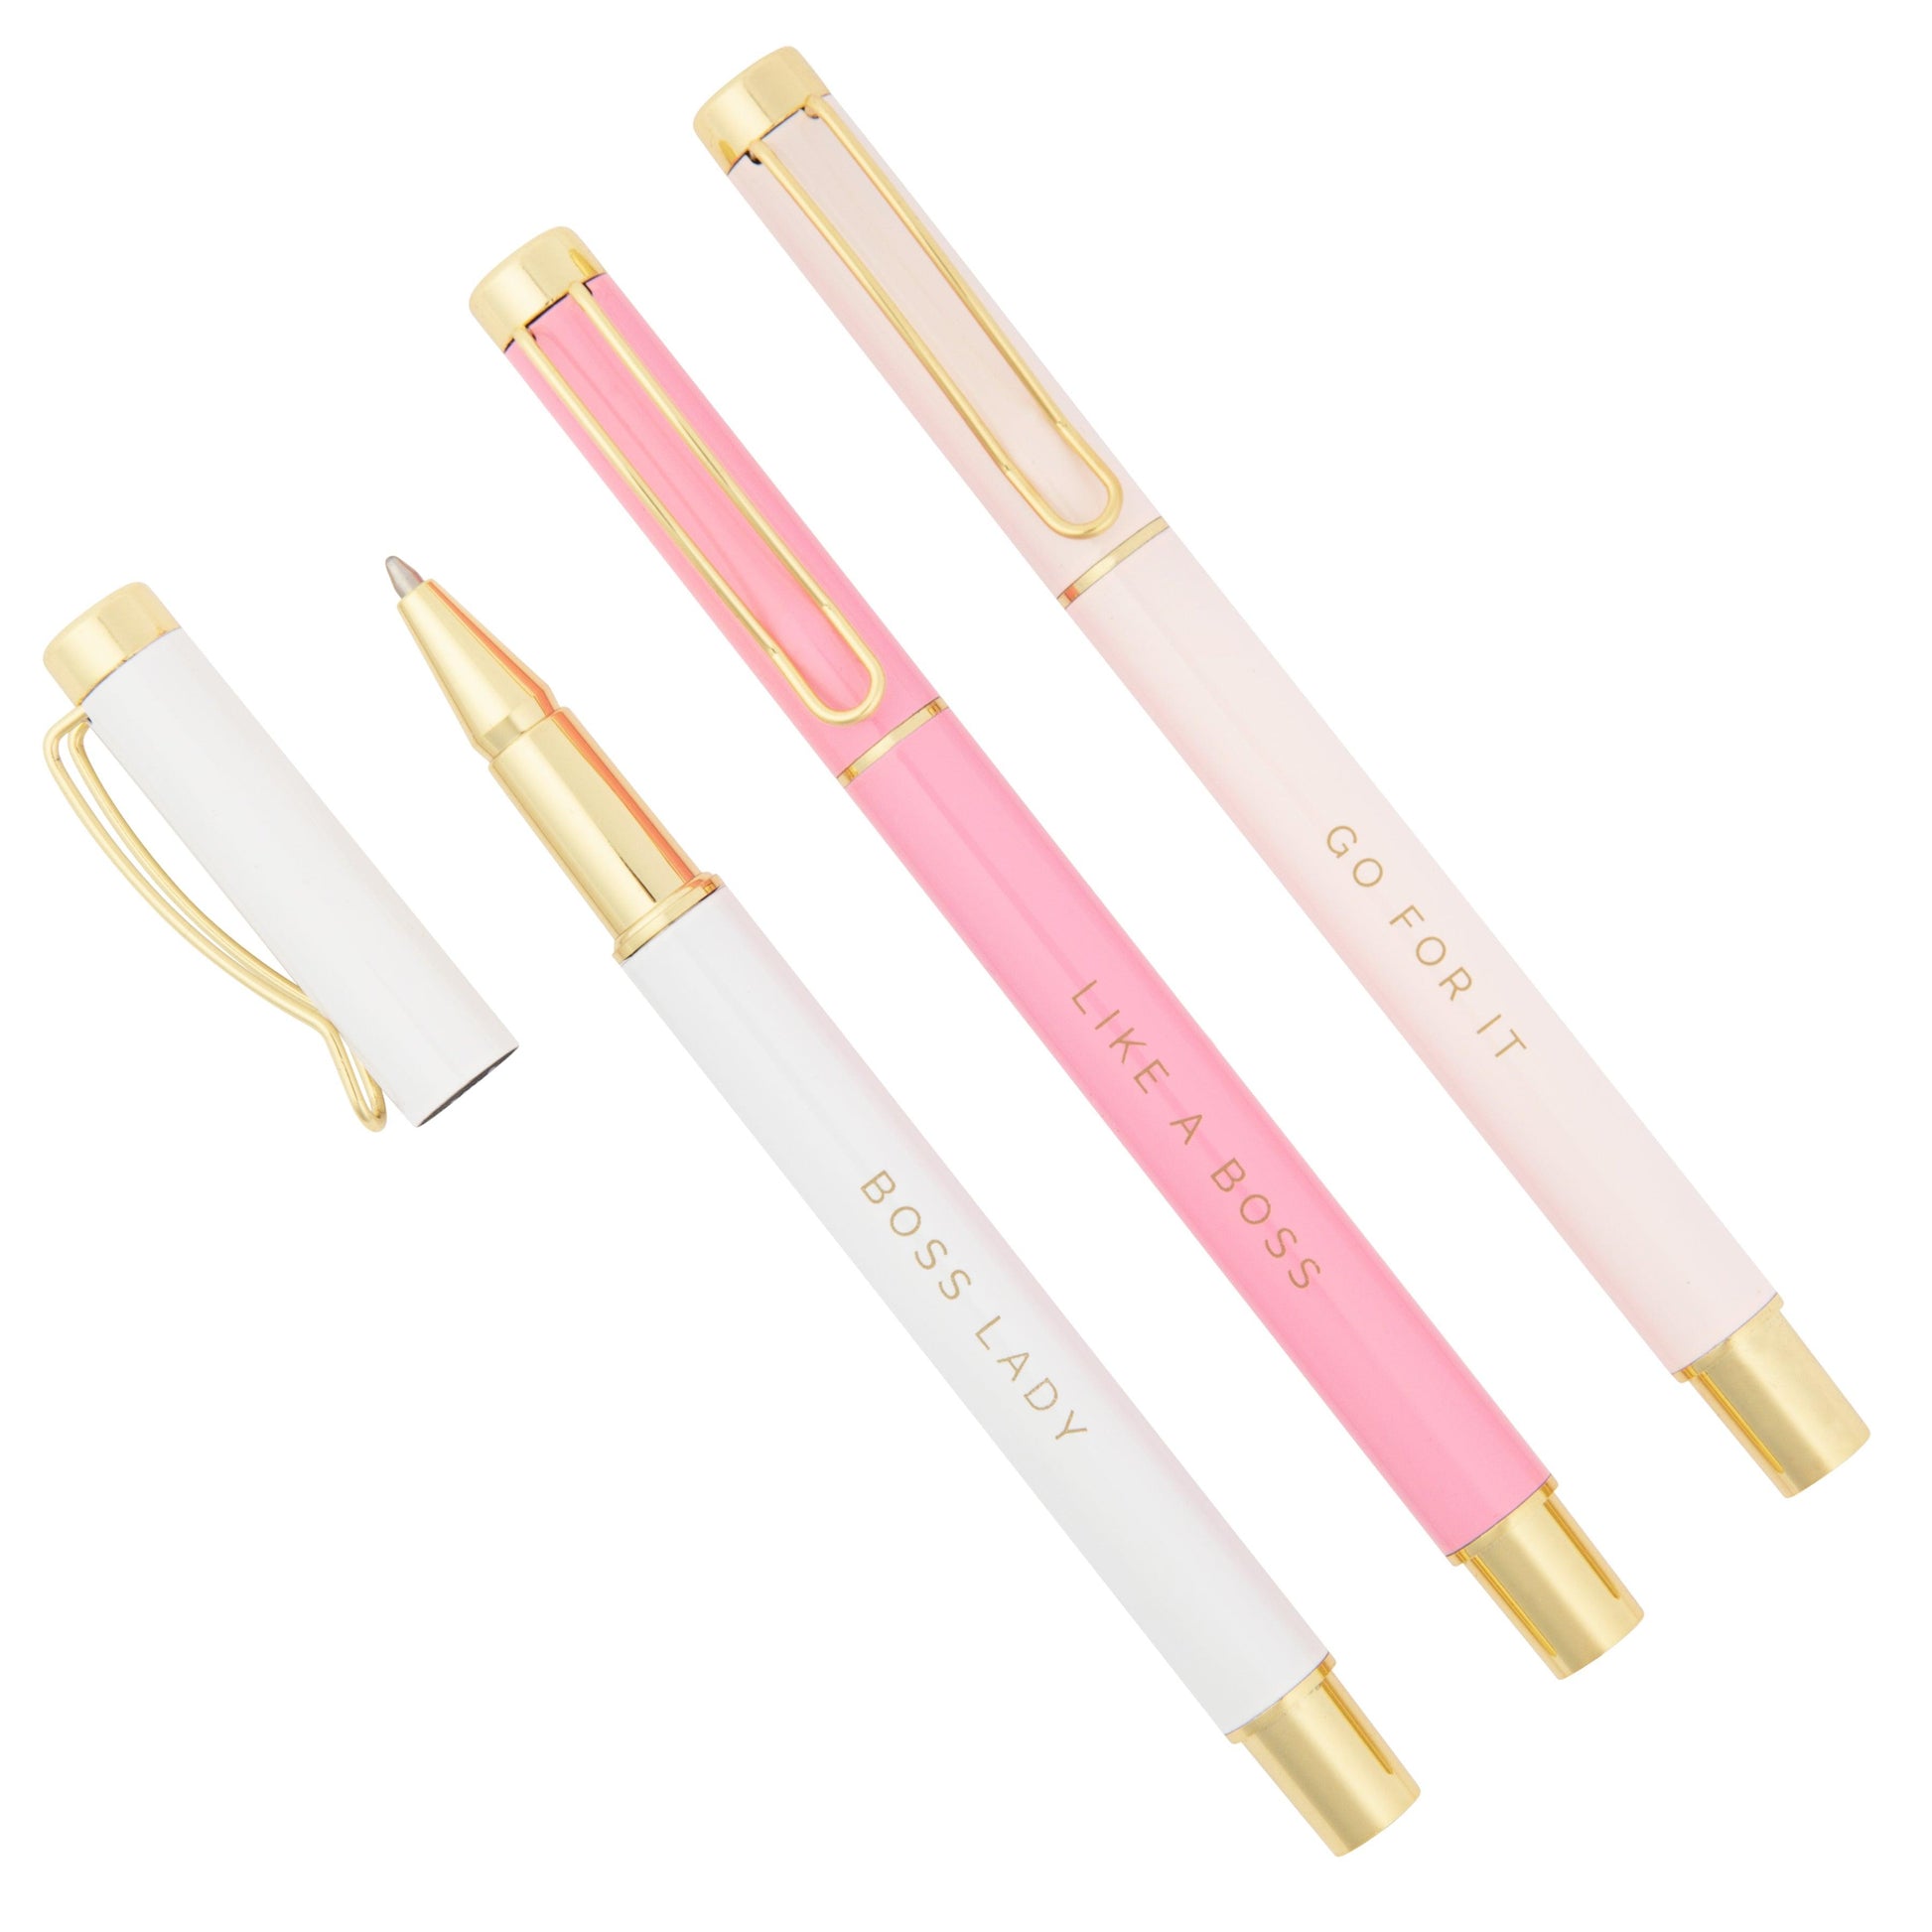 Boss Lady Metal Pen Set - Made for Mama Shop